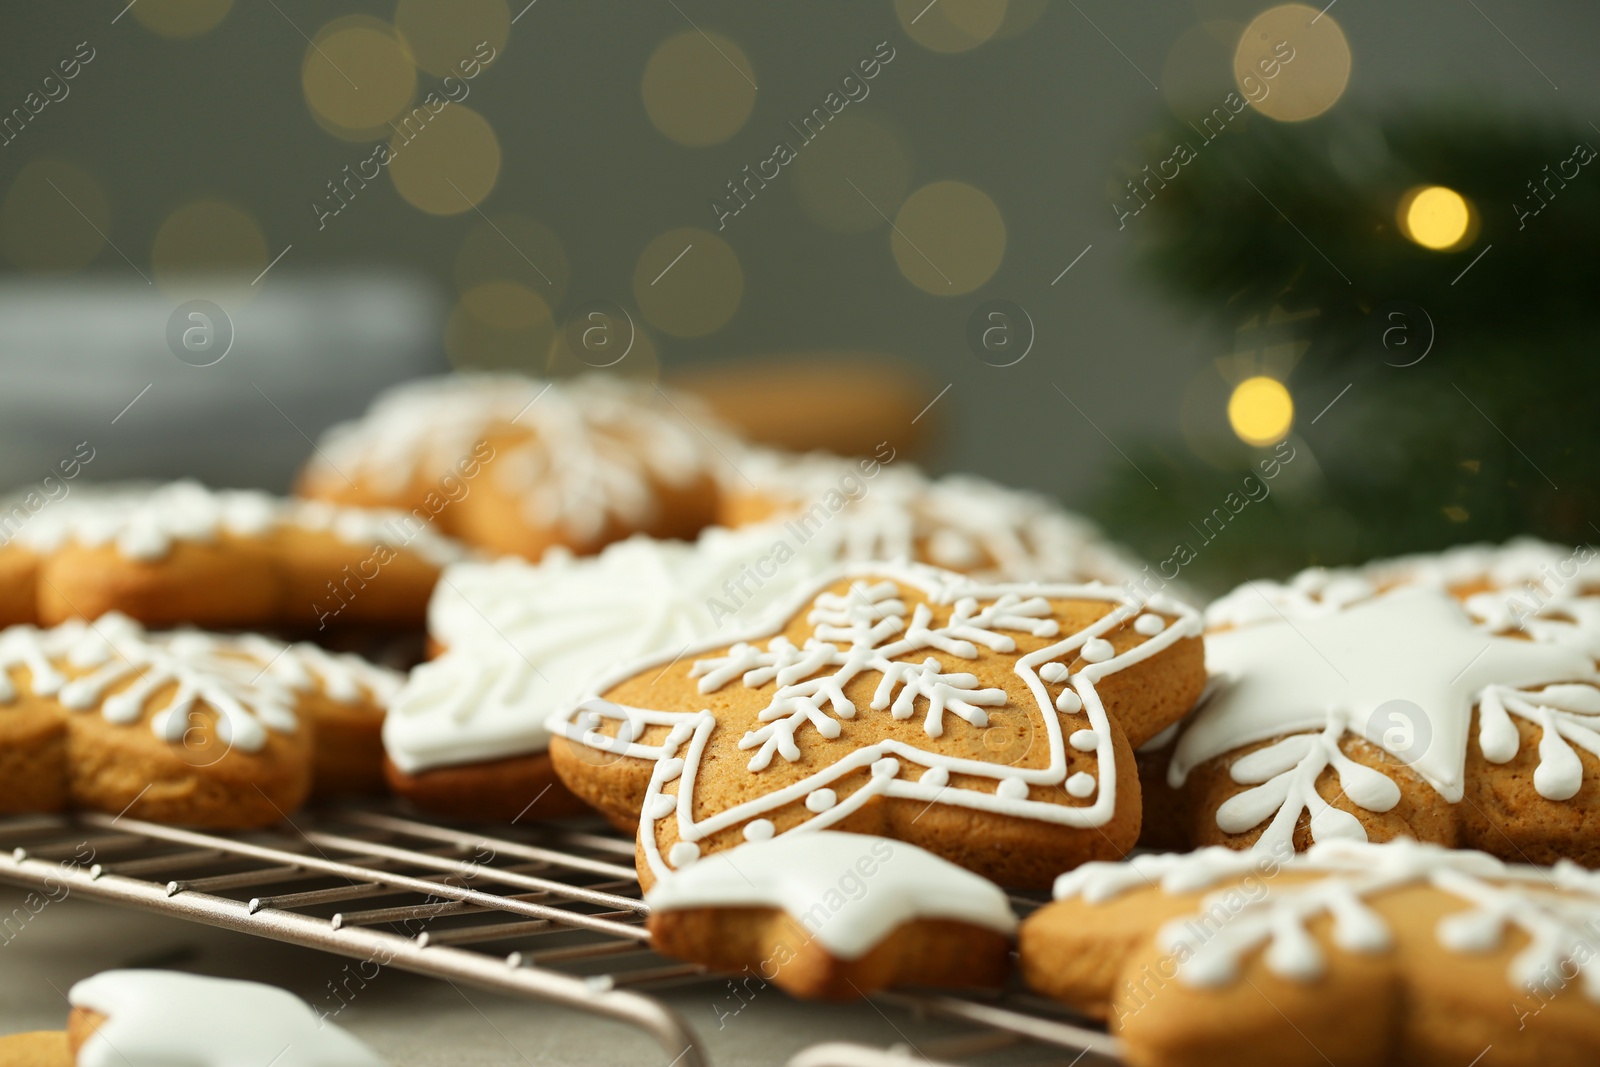 Photo of Tasty Christmas cookies with icing on baking grid against blurred lights, closeup